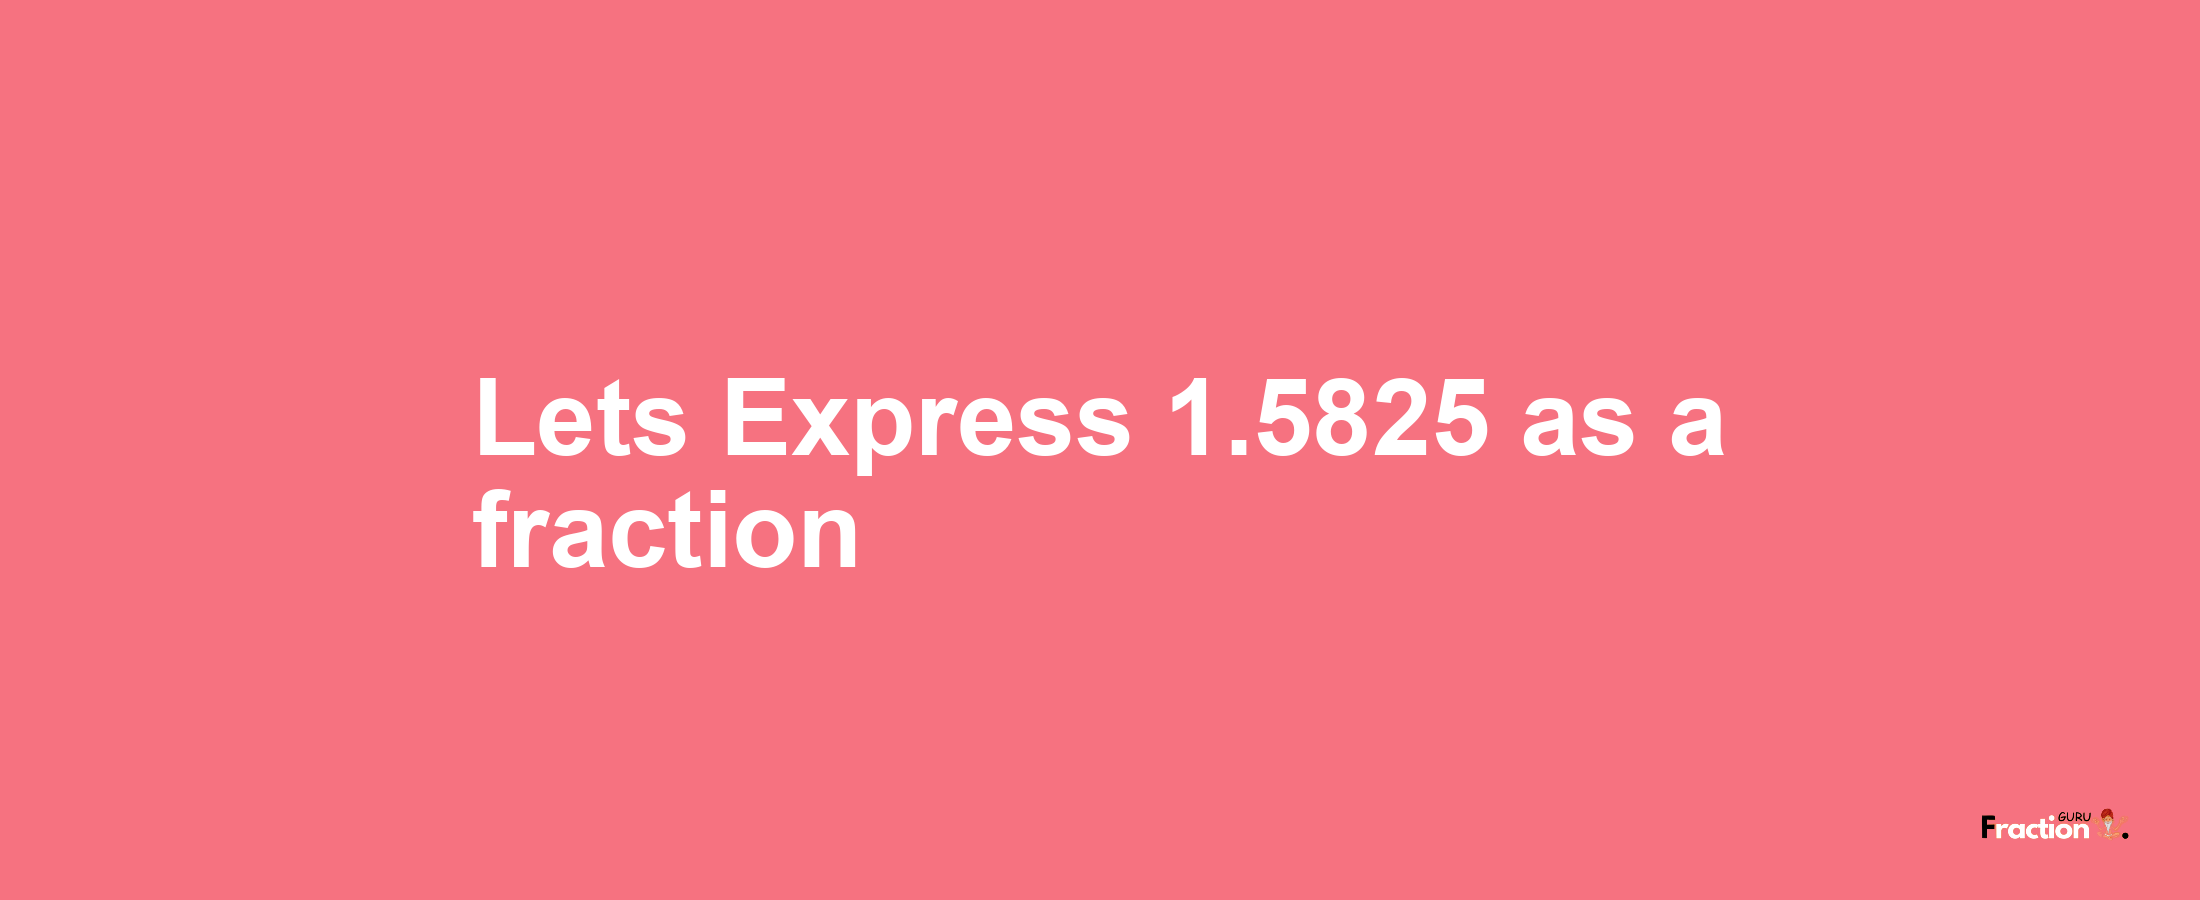 Lets Express 1.5825 as afraction